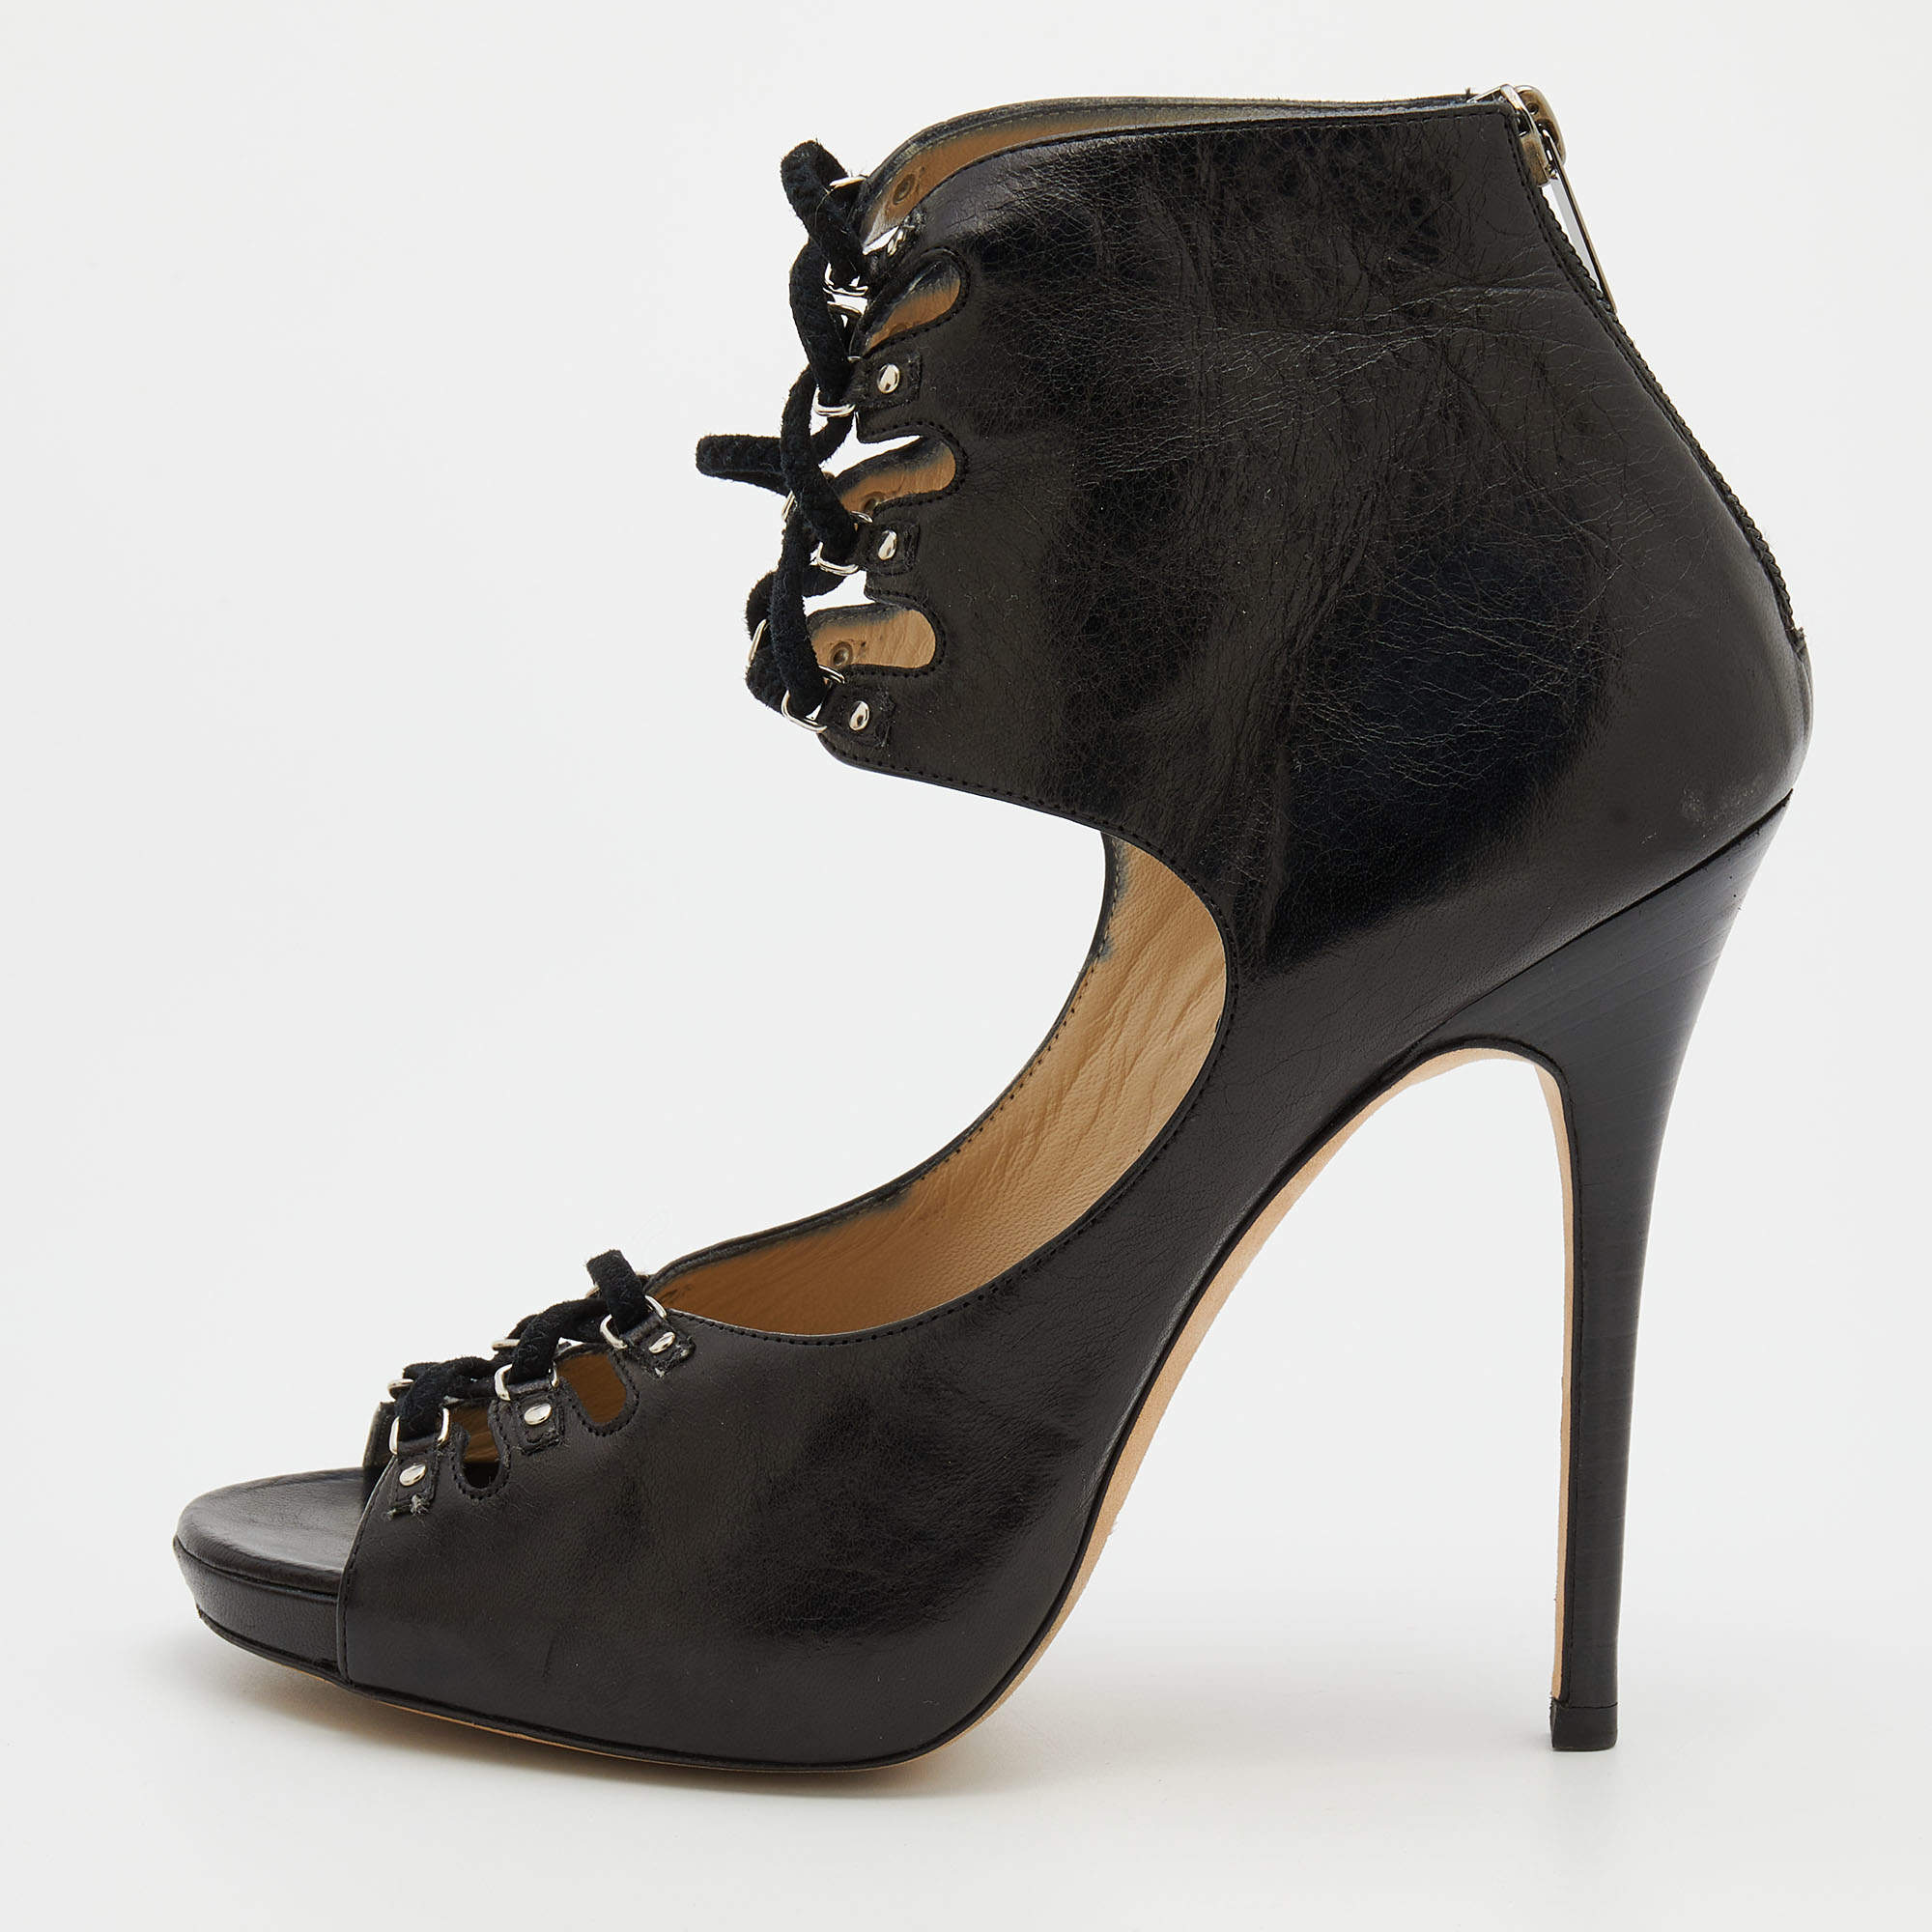 Jimmy Choo Black Leather Cut-Out Booties Size 40